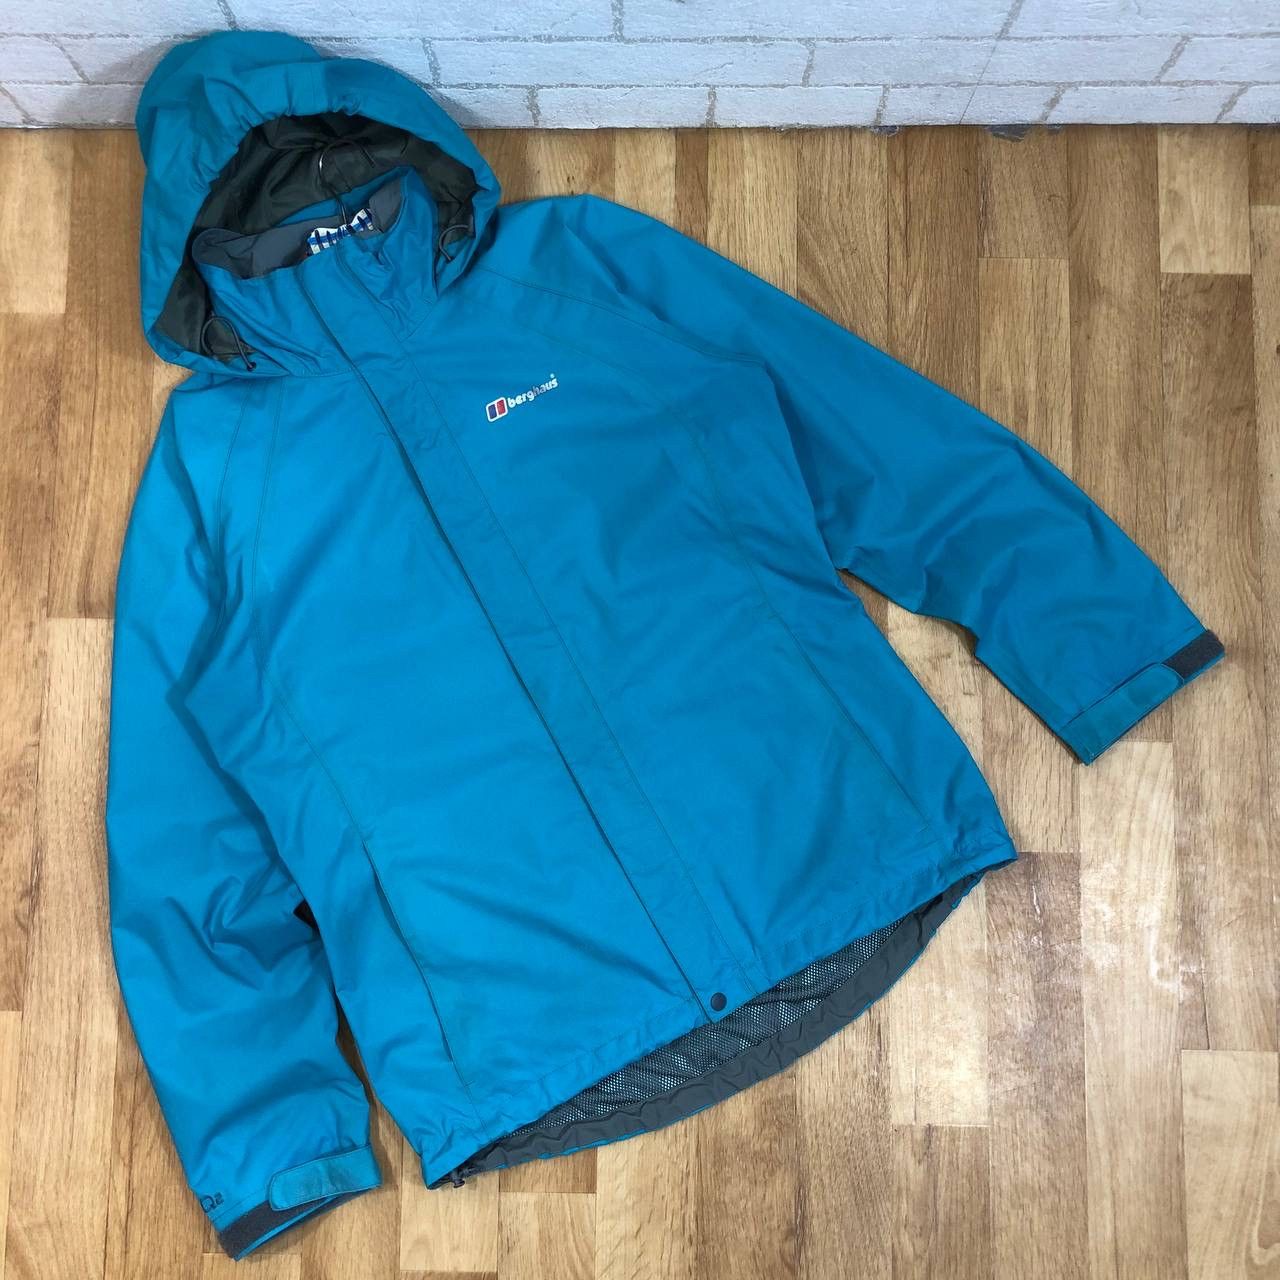 Outdoor Life Berghaus Aquafoil Membrane Hooded Jacket | Grailed